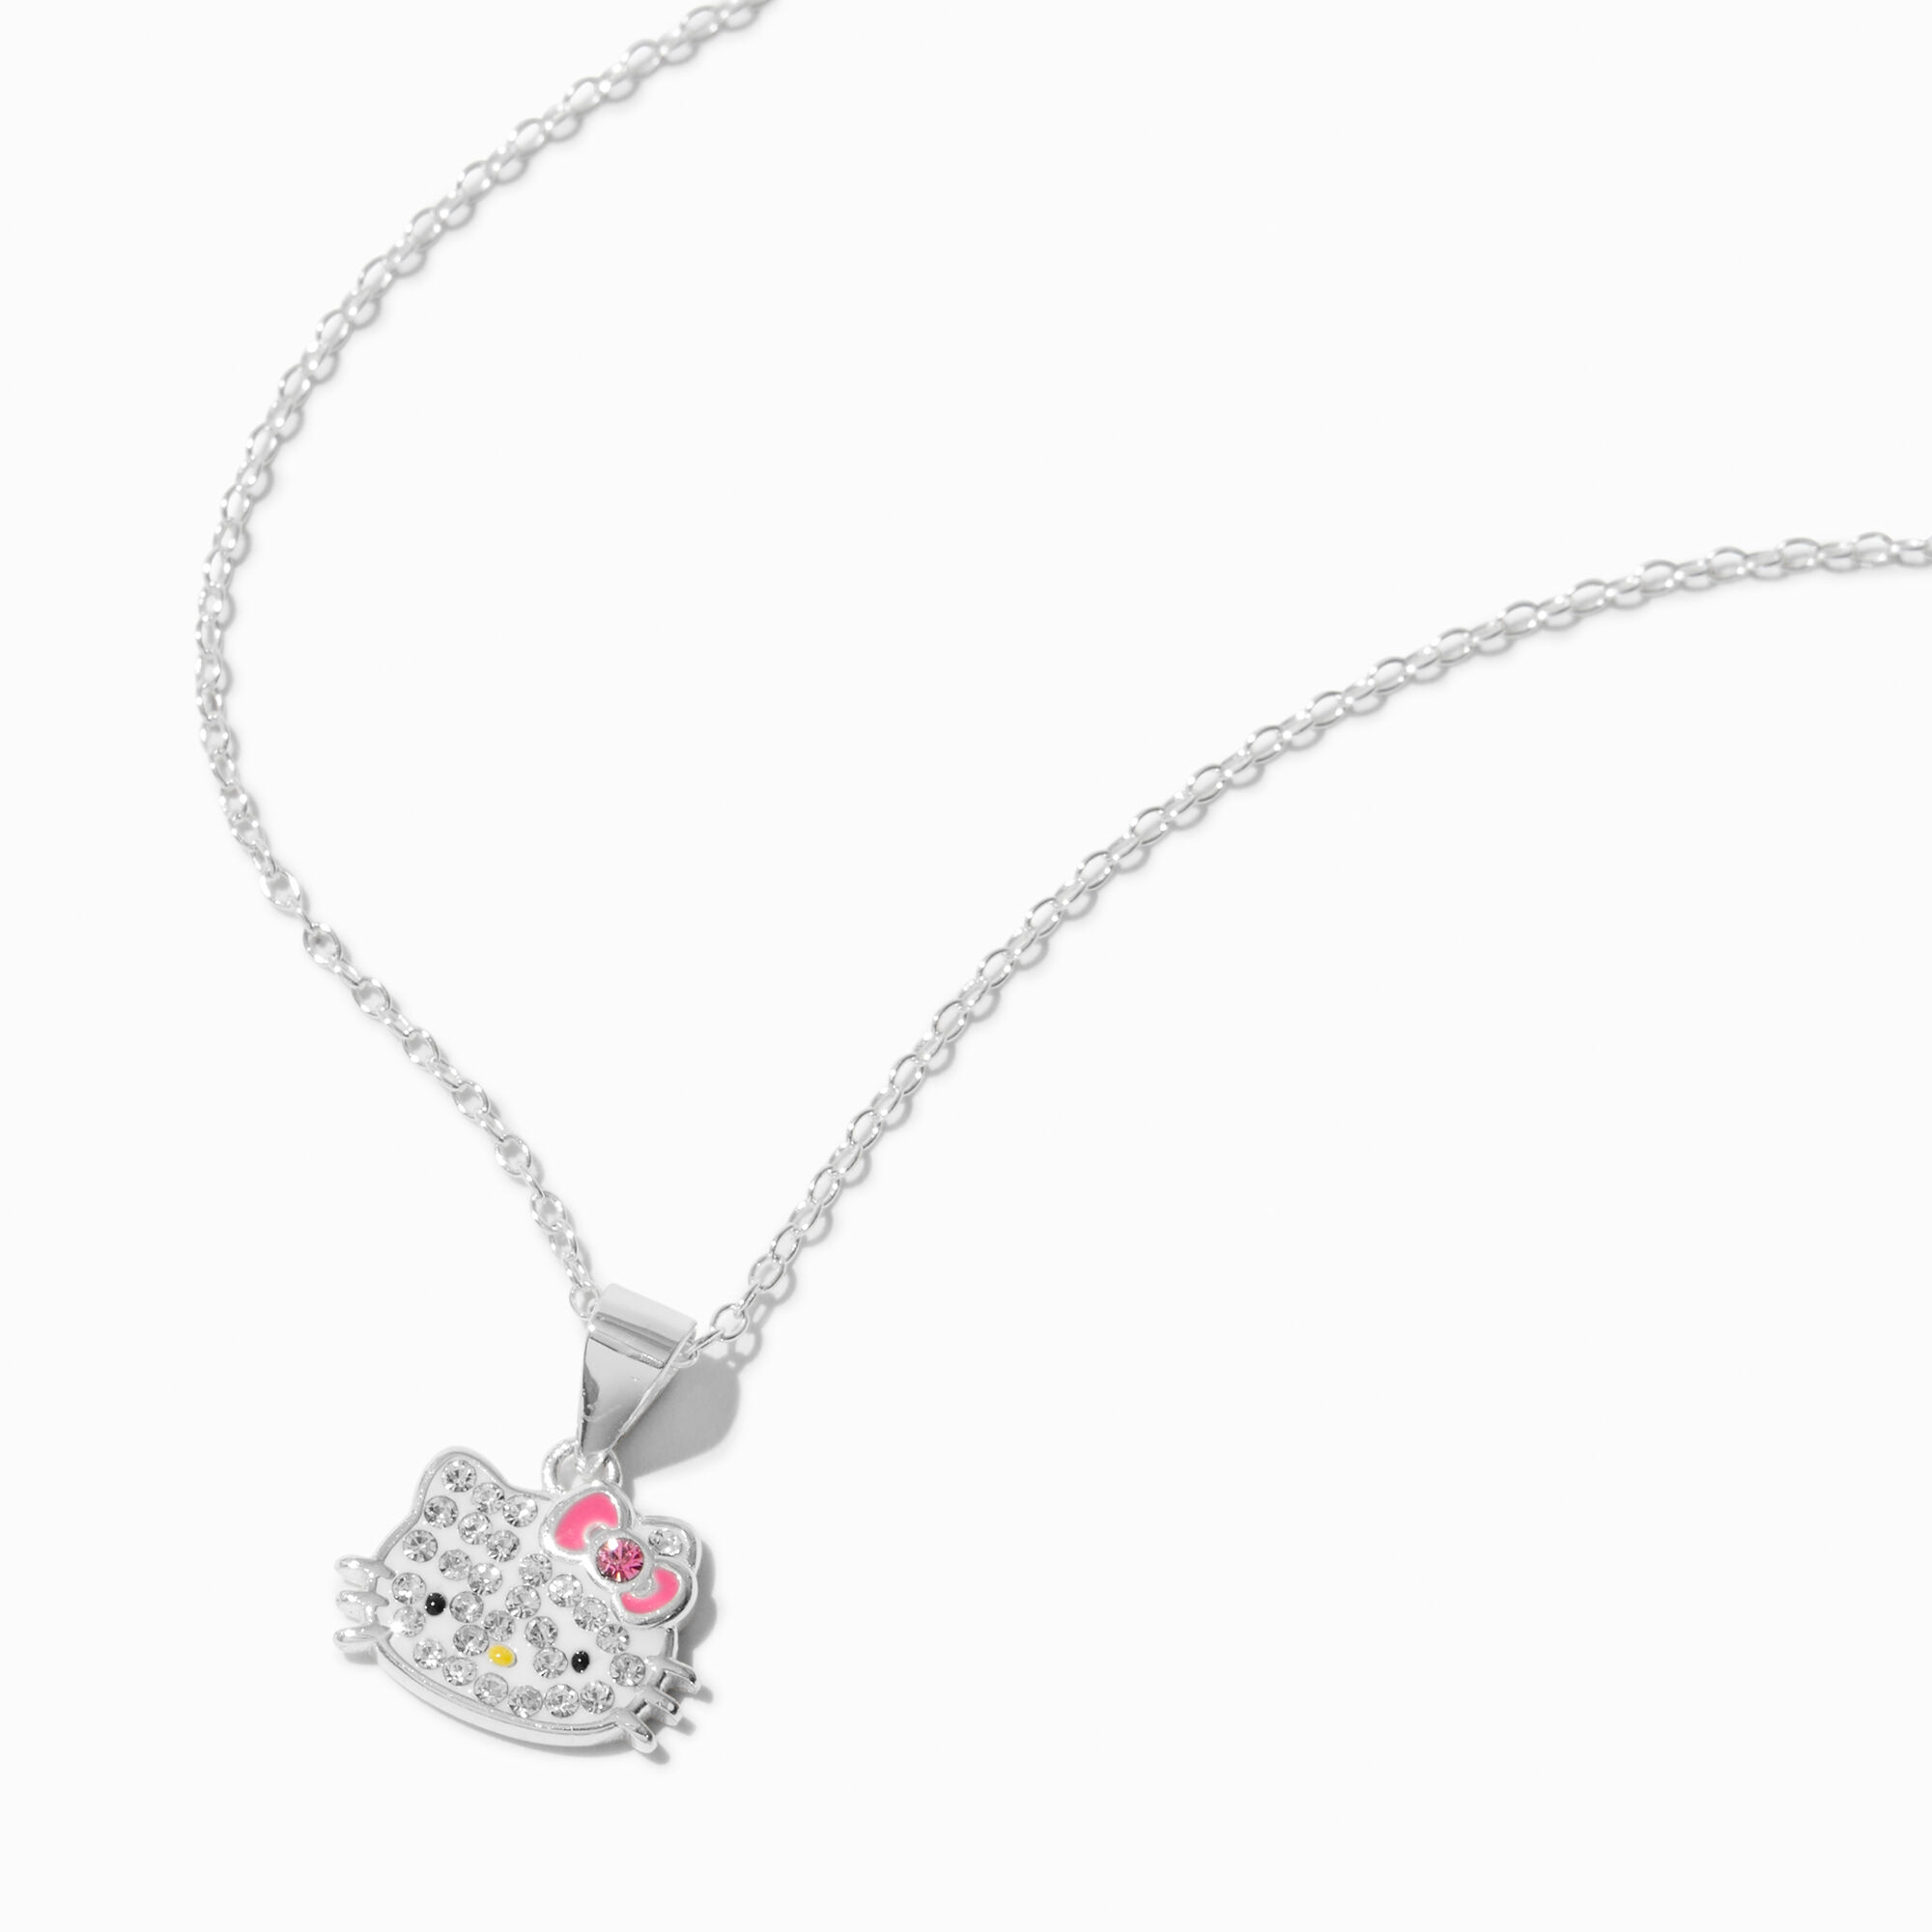 Hello Kitty Necklace & Dangly Earrings set – Yay Boutique